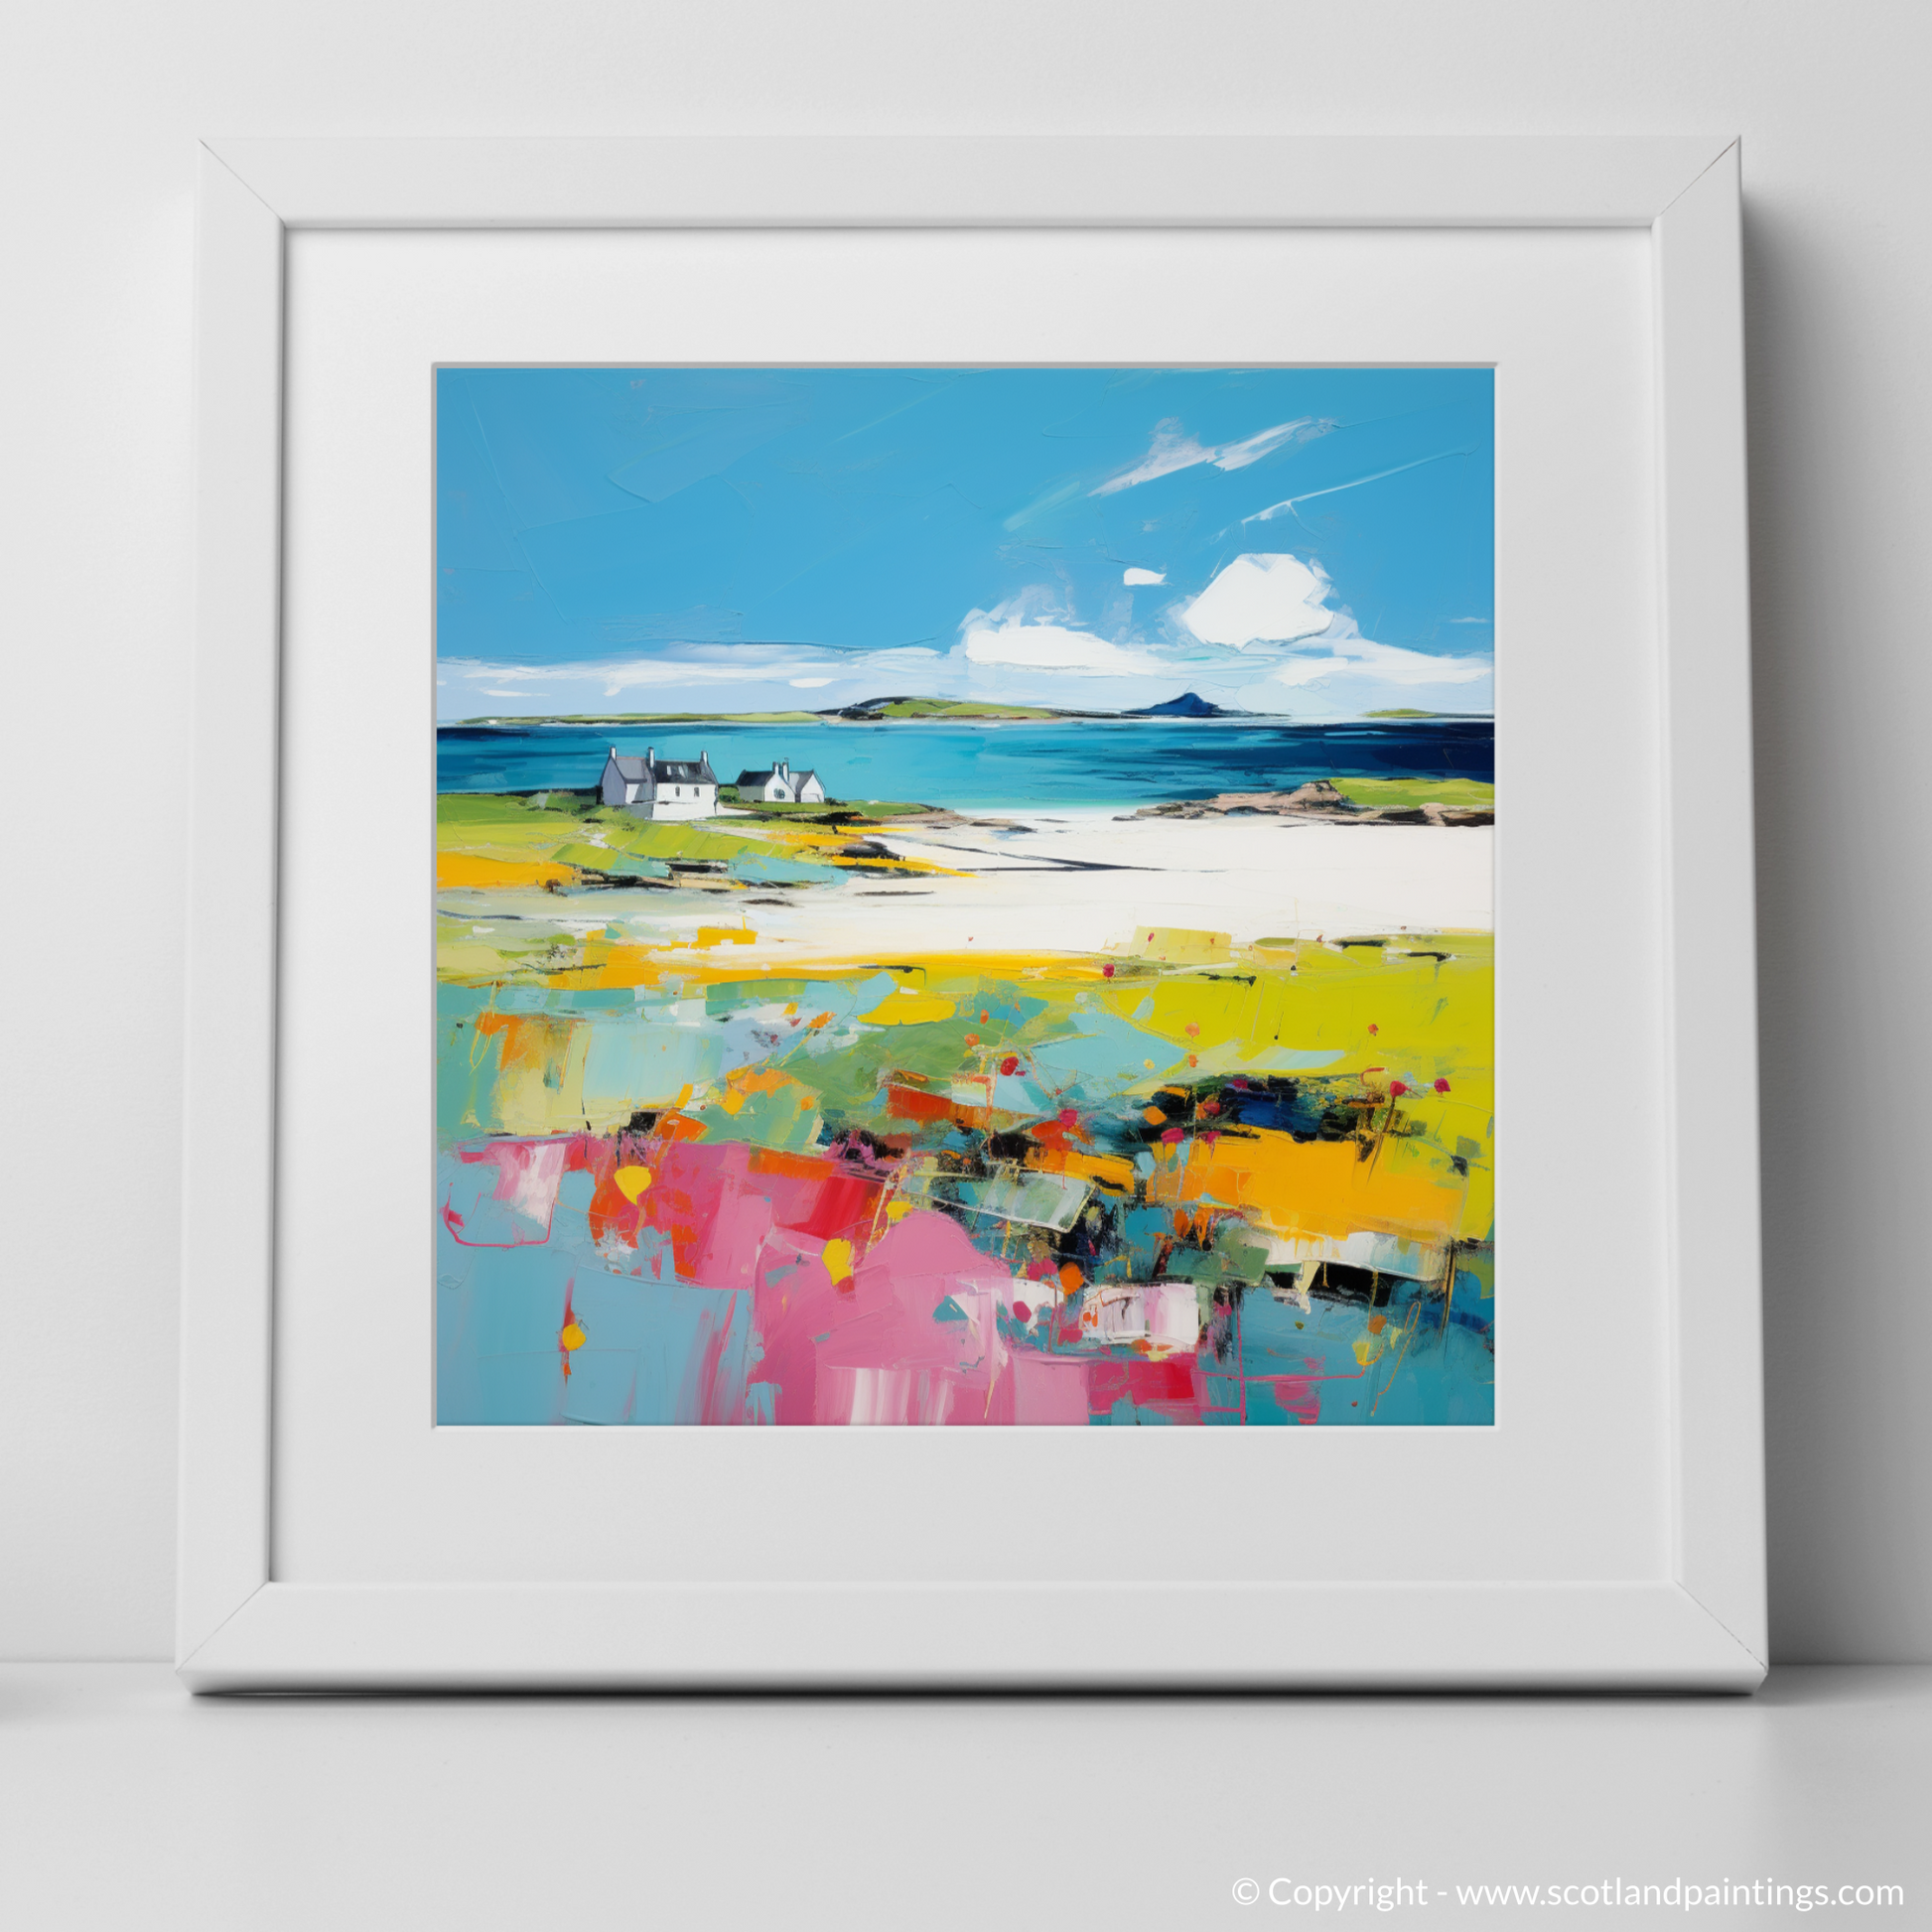 Art Print of Isle of Tiree, Inner Hebrides in summer with a white frame